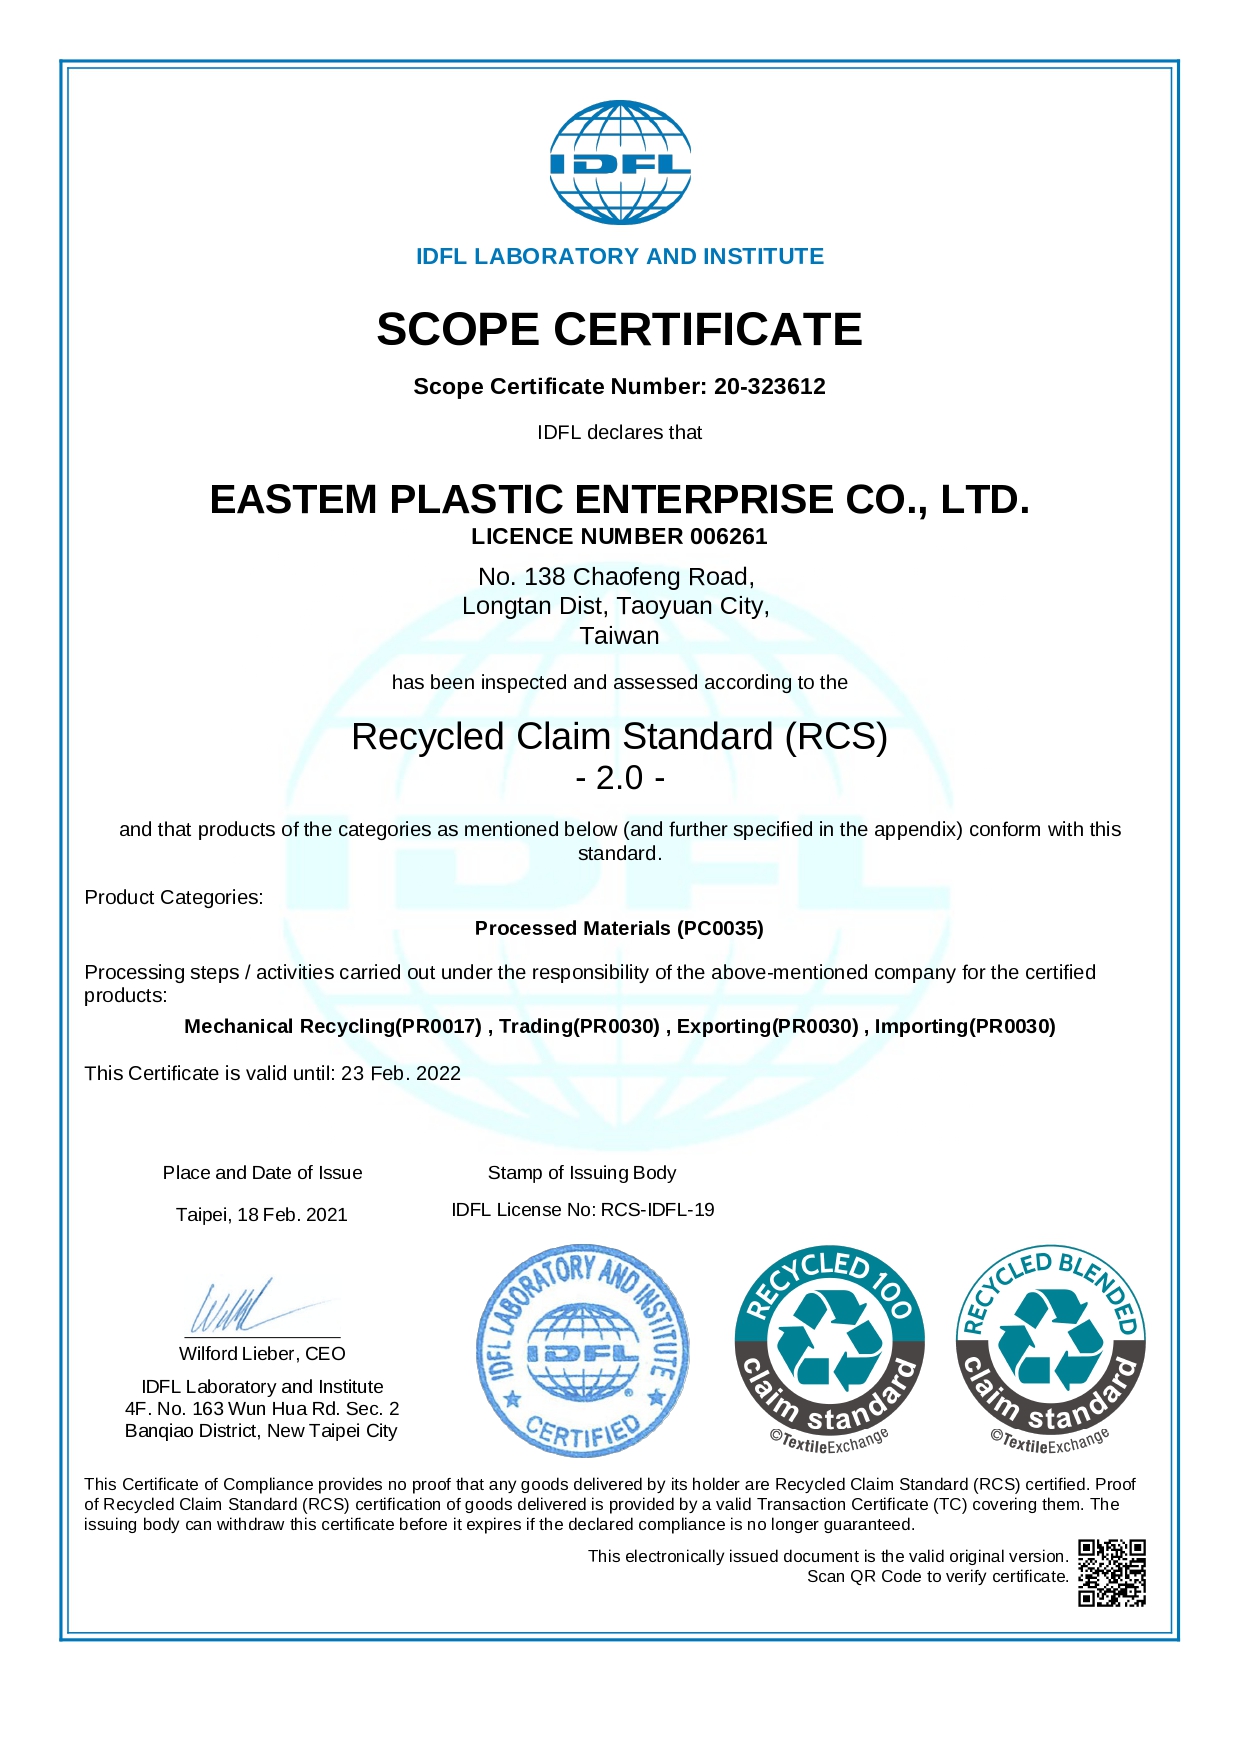 CERTIFICATE OF RECYCLED CLAIM STANDARD(RCS)